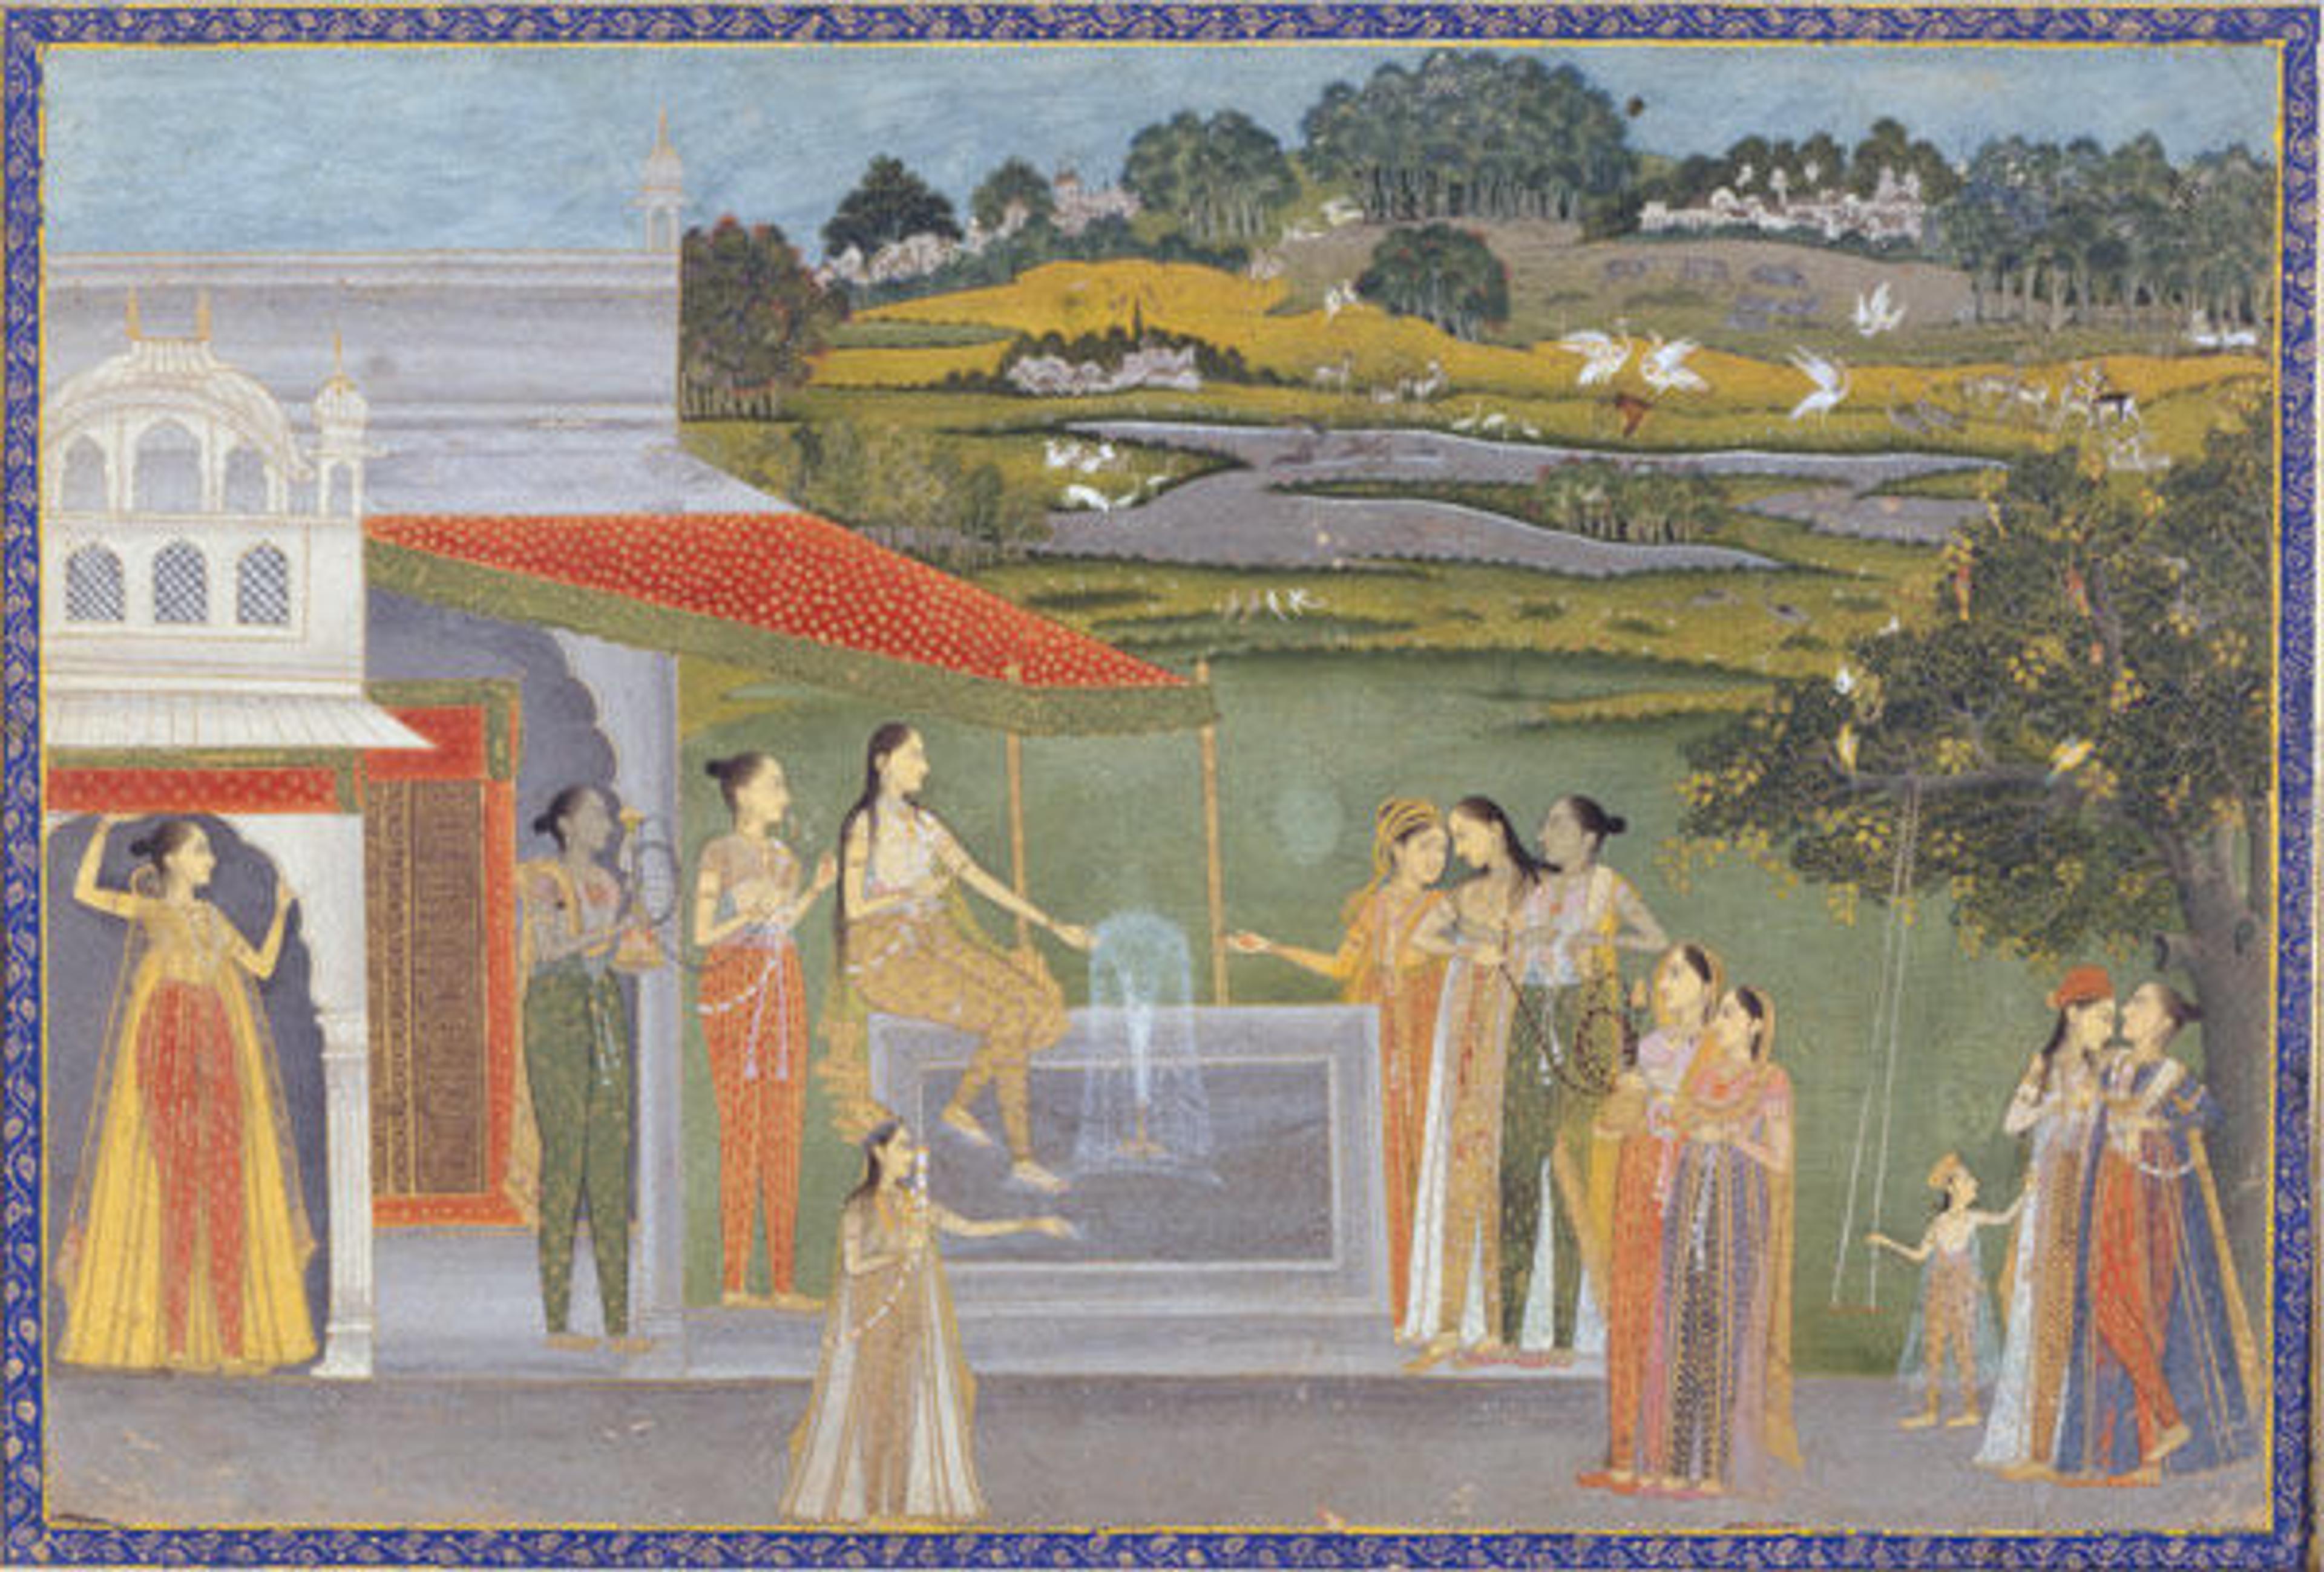 Princesses Gather at a Fountain, 1770. Farrukhabad, India. Islamic. Opaque watercolor and gold on paper; 9 x 13 5/8 in. (22.9 x 34.6 cm). The Metropolitan Museum of Art, New York, Cynthia Hazen Polsky and Leon B. Polsky Fund, 2001 (2001.421)